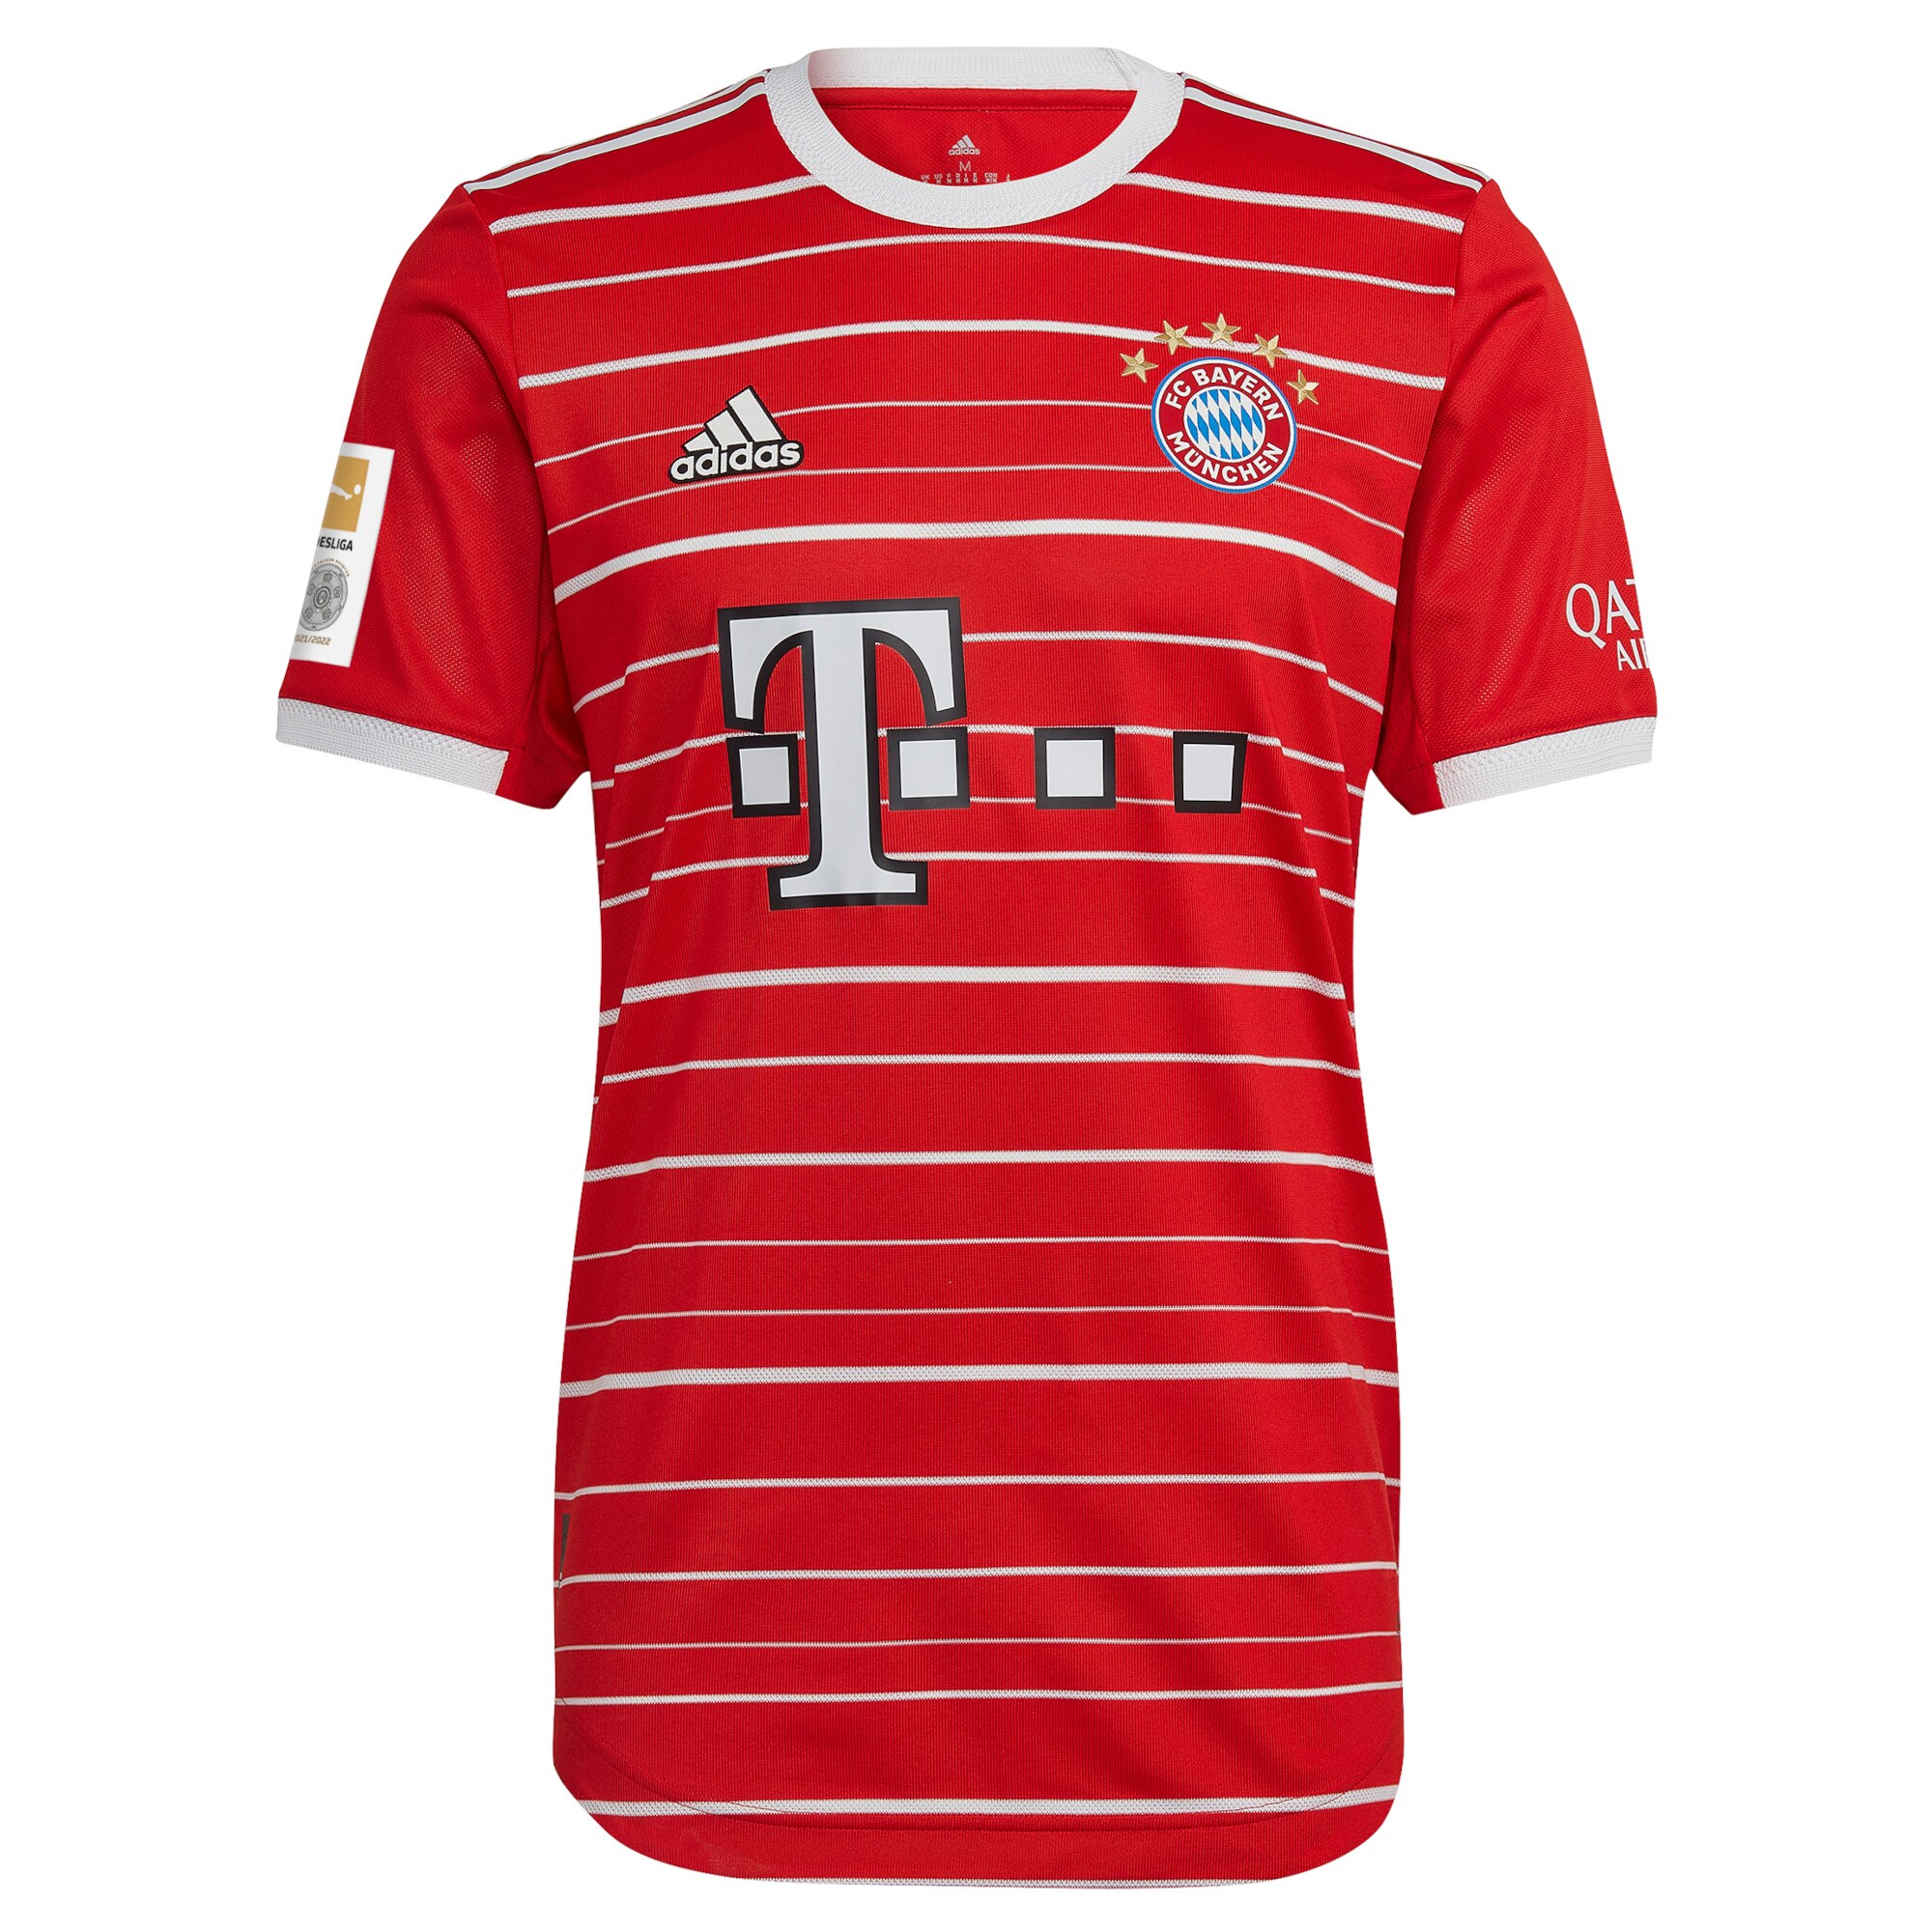 FC Bayern Home Authentic Shirt 2022-2023 with Mazraoui 40 printing